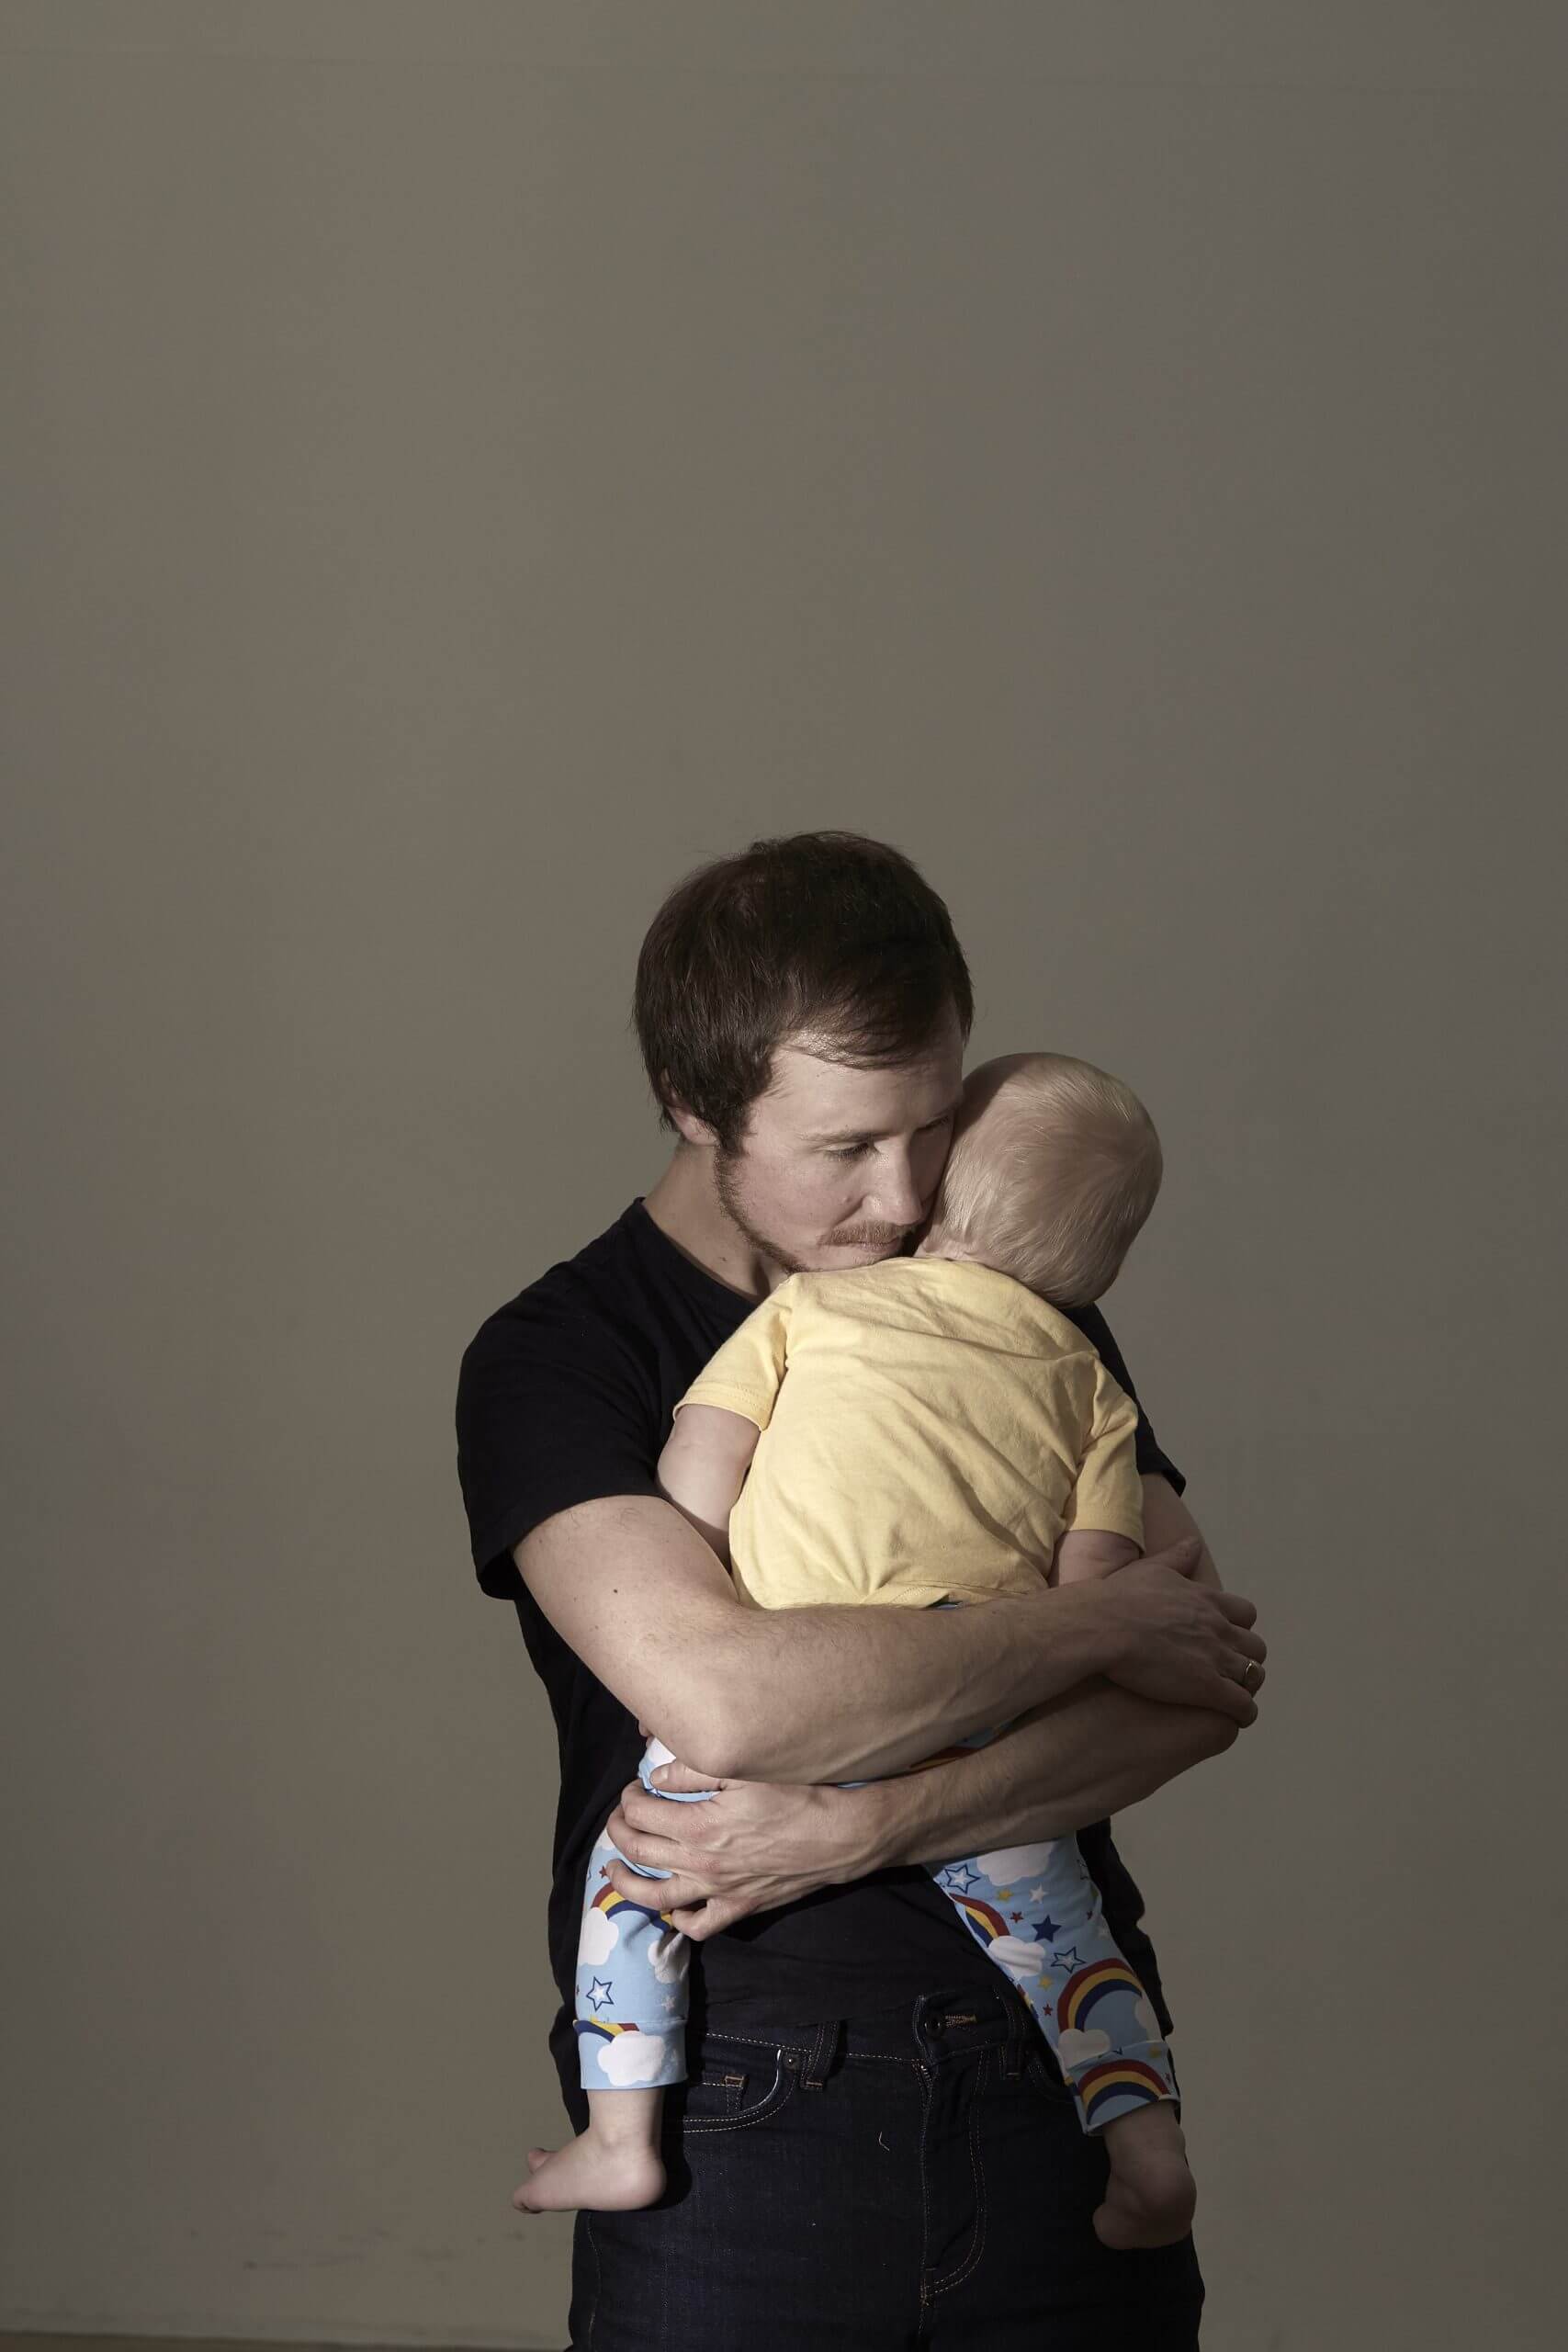 Still from Seahorse: The Dad Who Gave Birth. Freddy is standing against a green background. He is cradling the son he carried and gave birth to. The child has their face turned away and the blonde back of their head is shown.